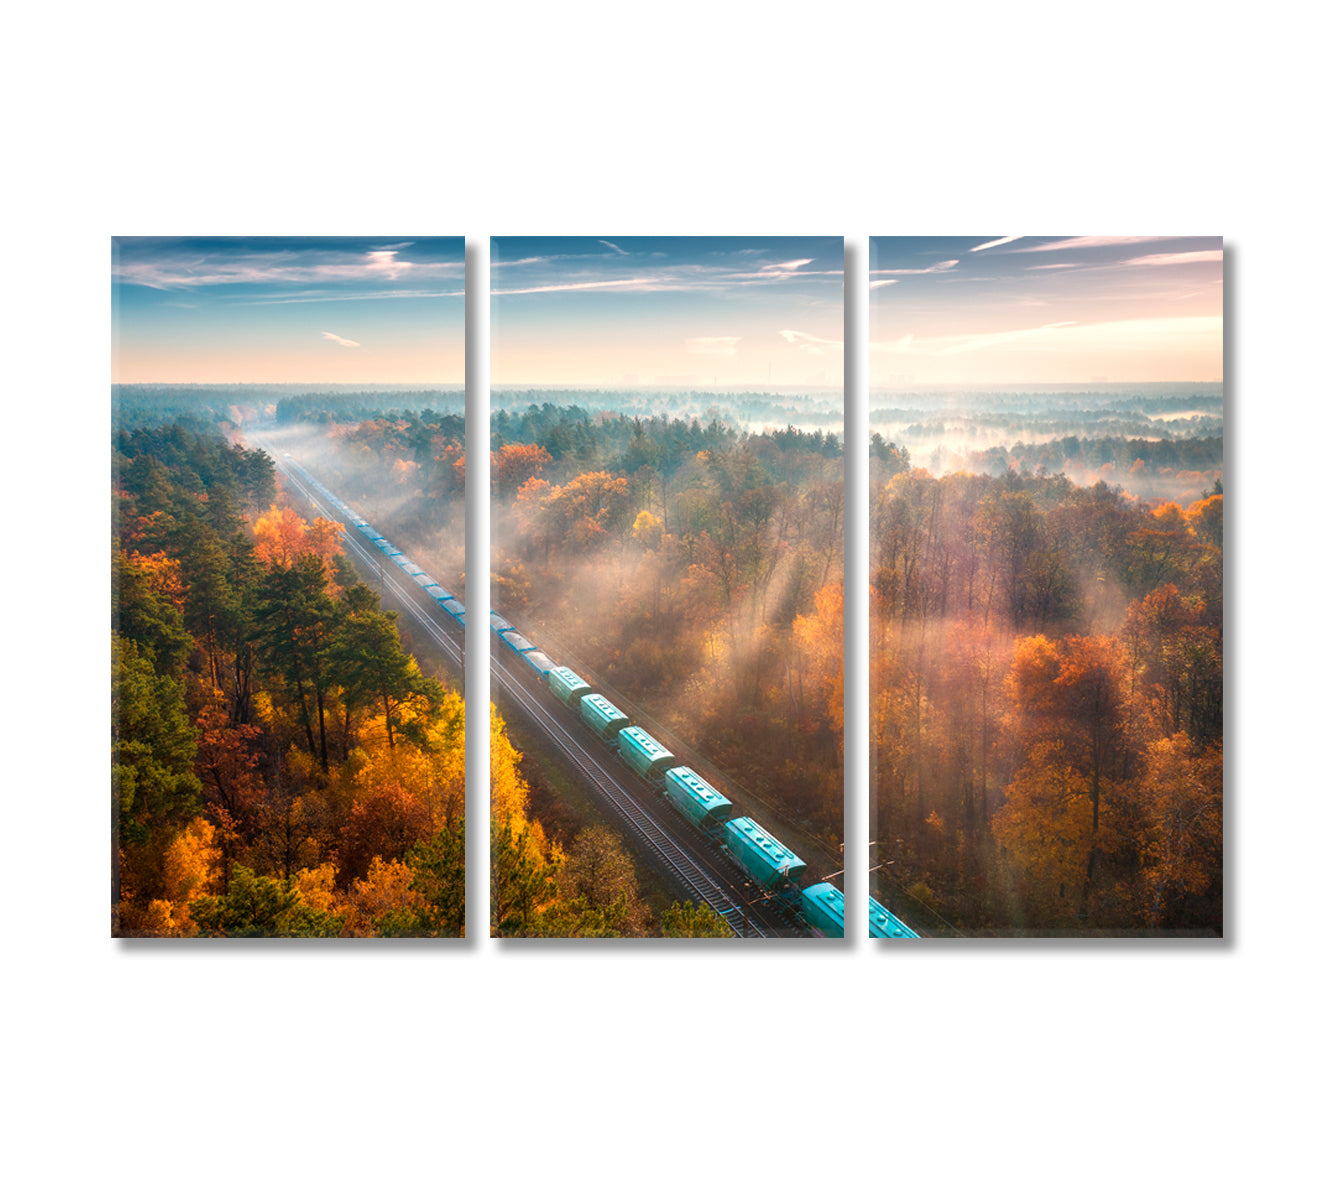 Freight Train in Beautiful Autumn Foggy Forest Canvas Print-Canvas Print-CetArt-3 Panels-36x24 inches-CetArt